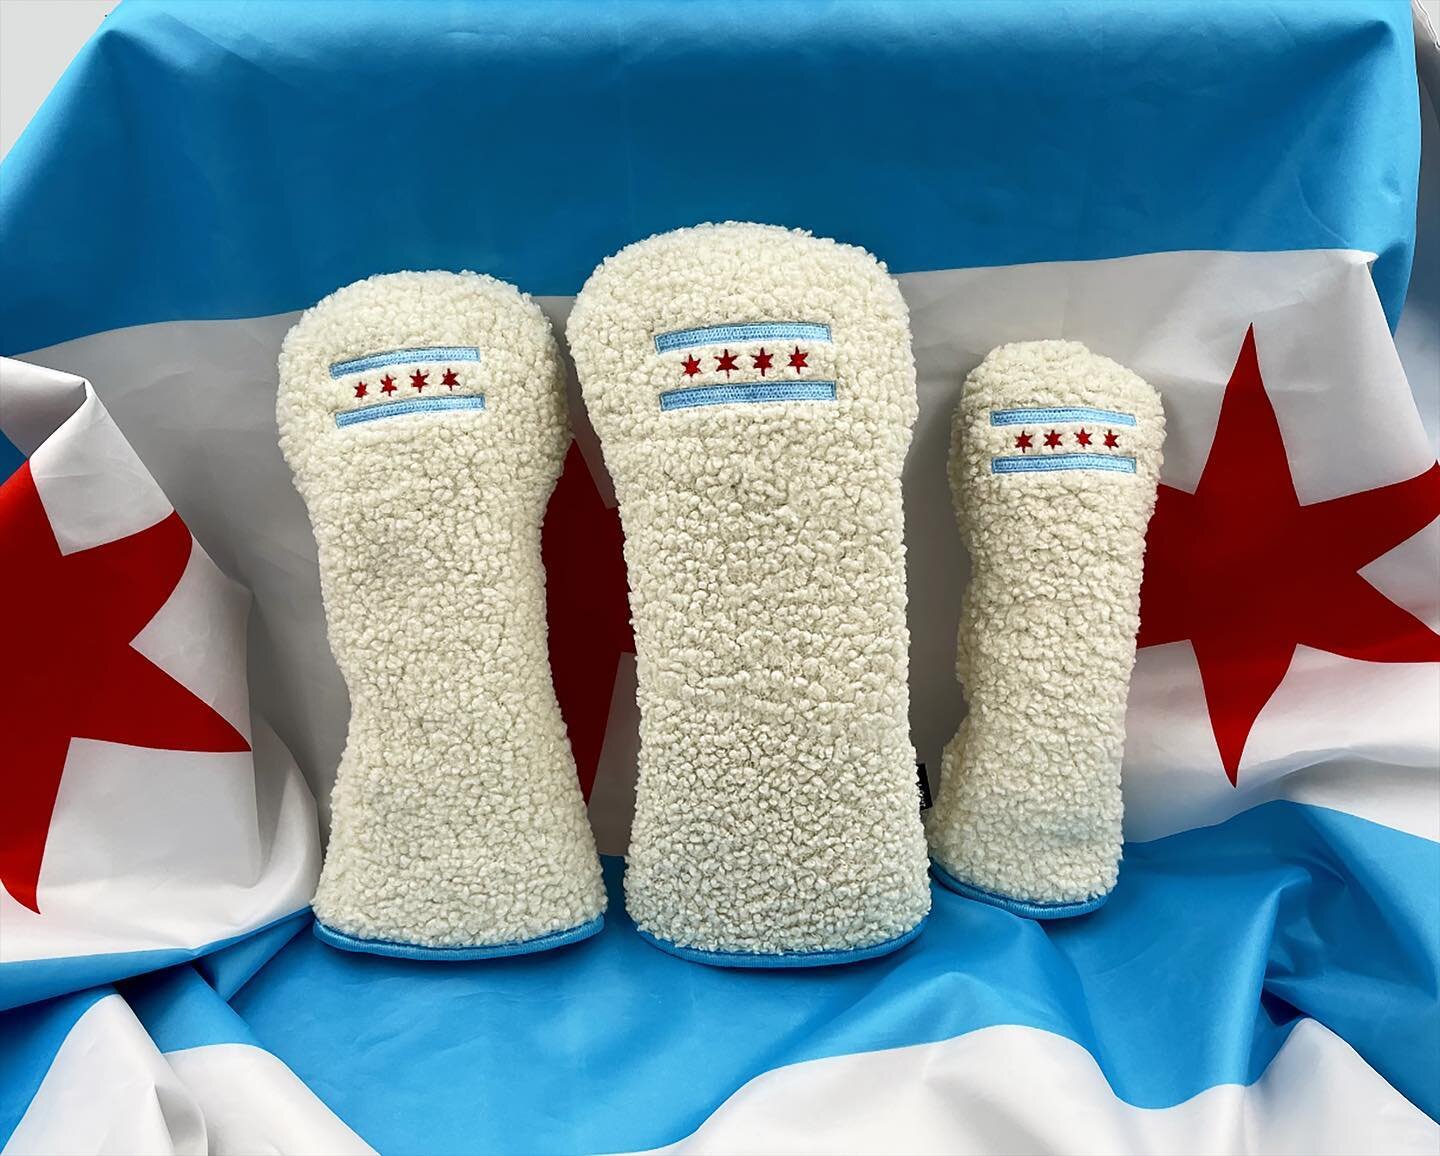 Our new Chicago flag inspired sherpa headcovers
.
.
.
.
#headcover #headcovers #sherpa #golf #handmade #golfaccessories #pgashow #pga #golfmerch #golfmerchandise #chicagogolf #golflife #proshop #sherpaheadcover #golfshop